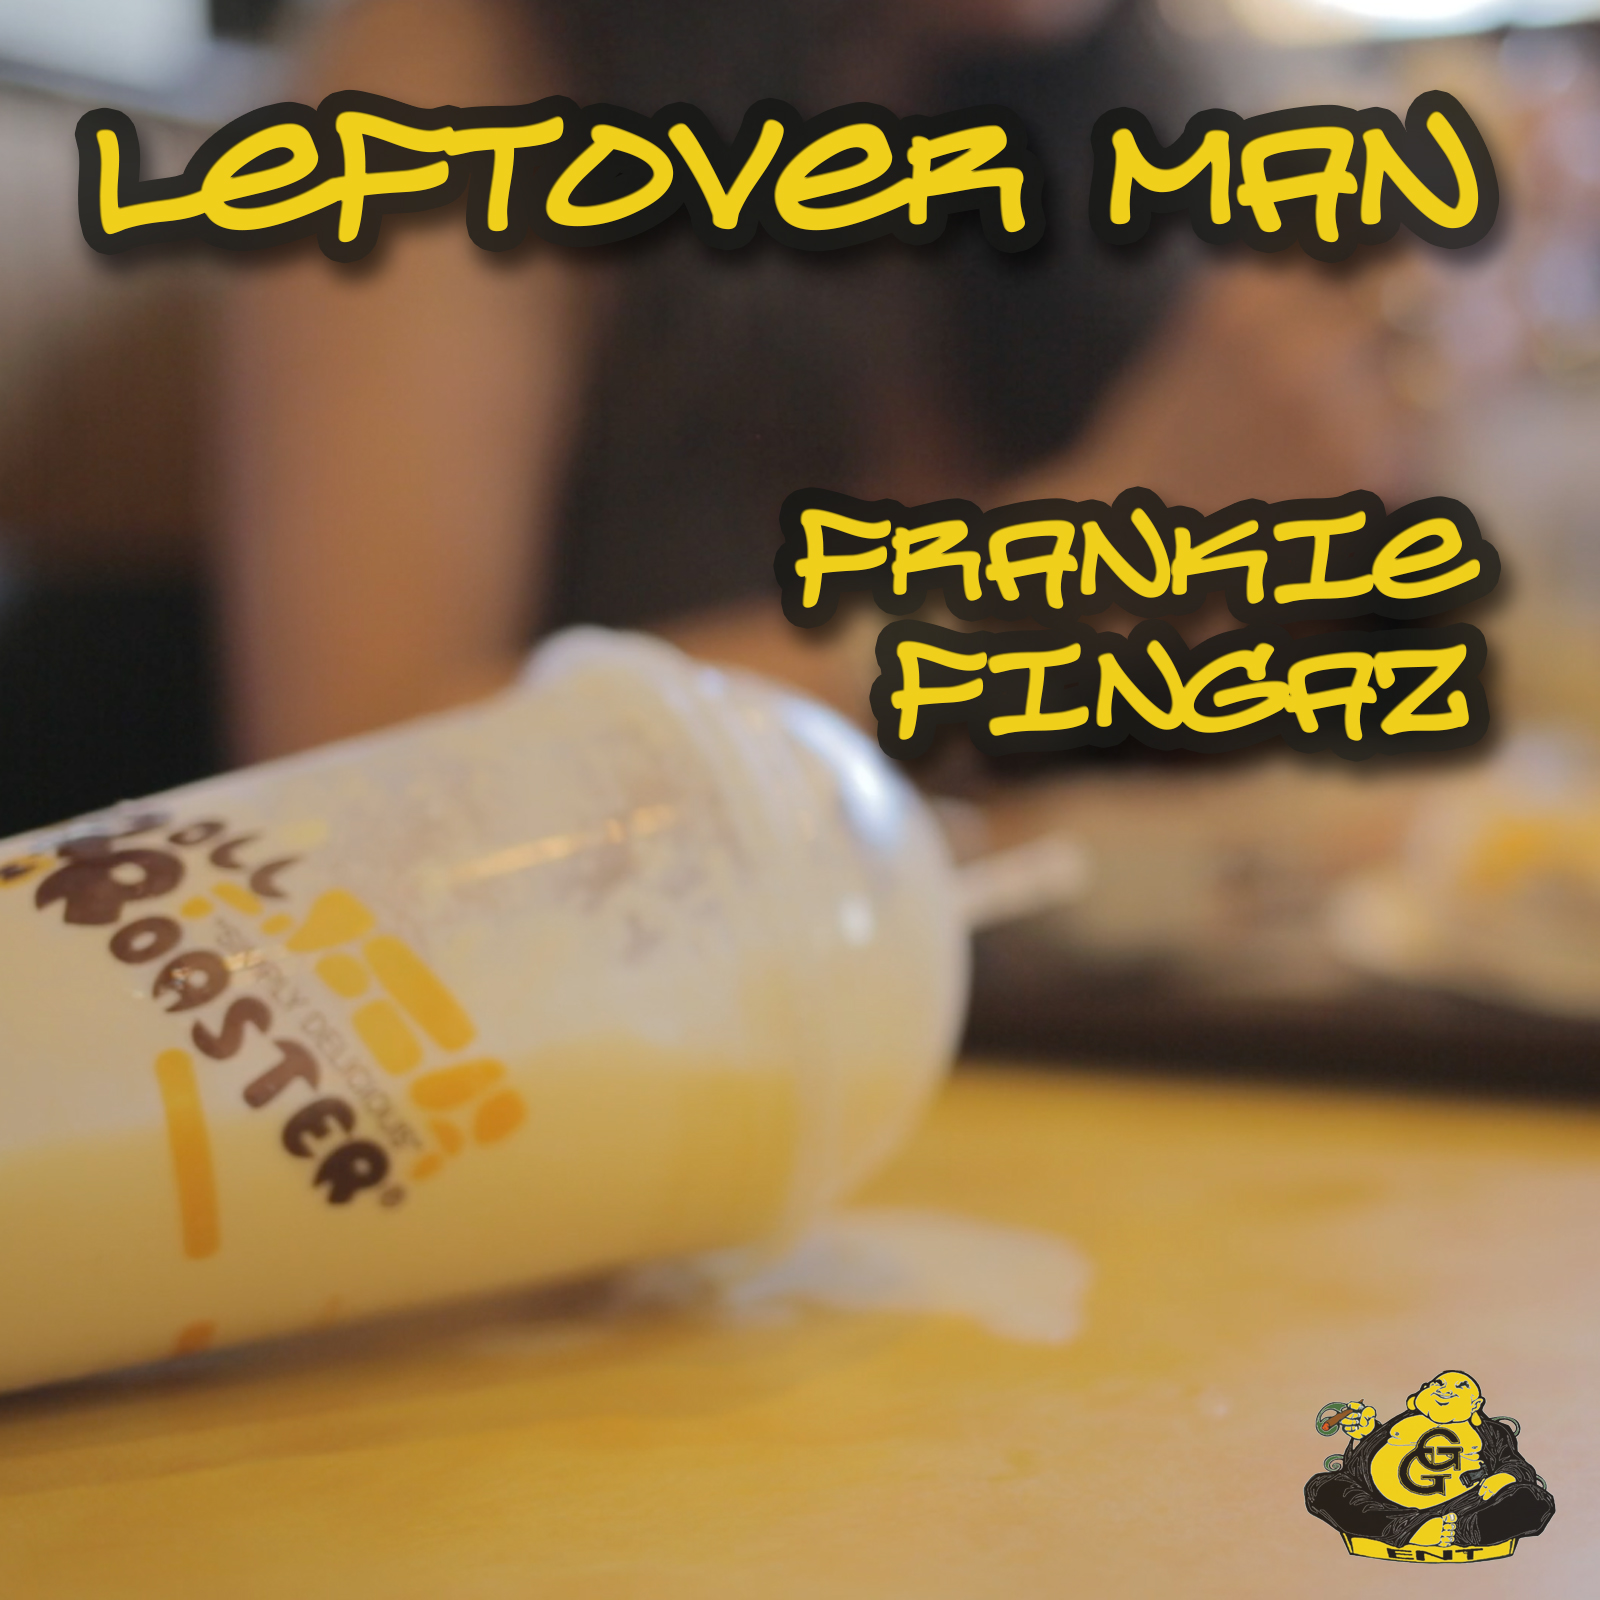 Read more about the article “Leftover Man” – Frankie Fingaz HQ Video